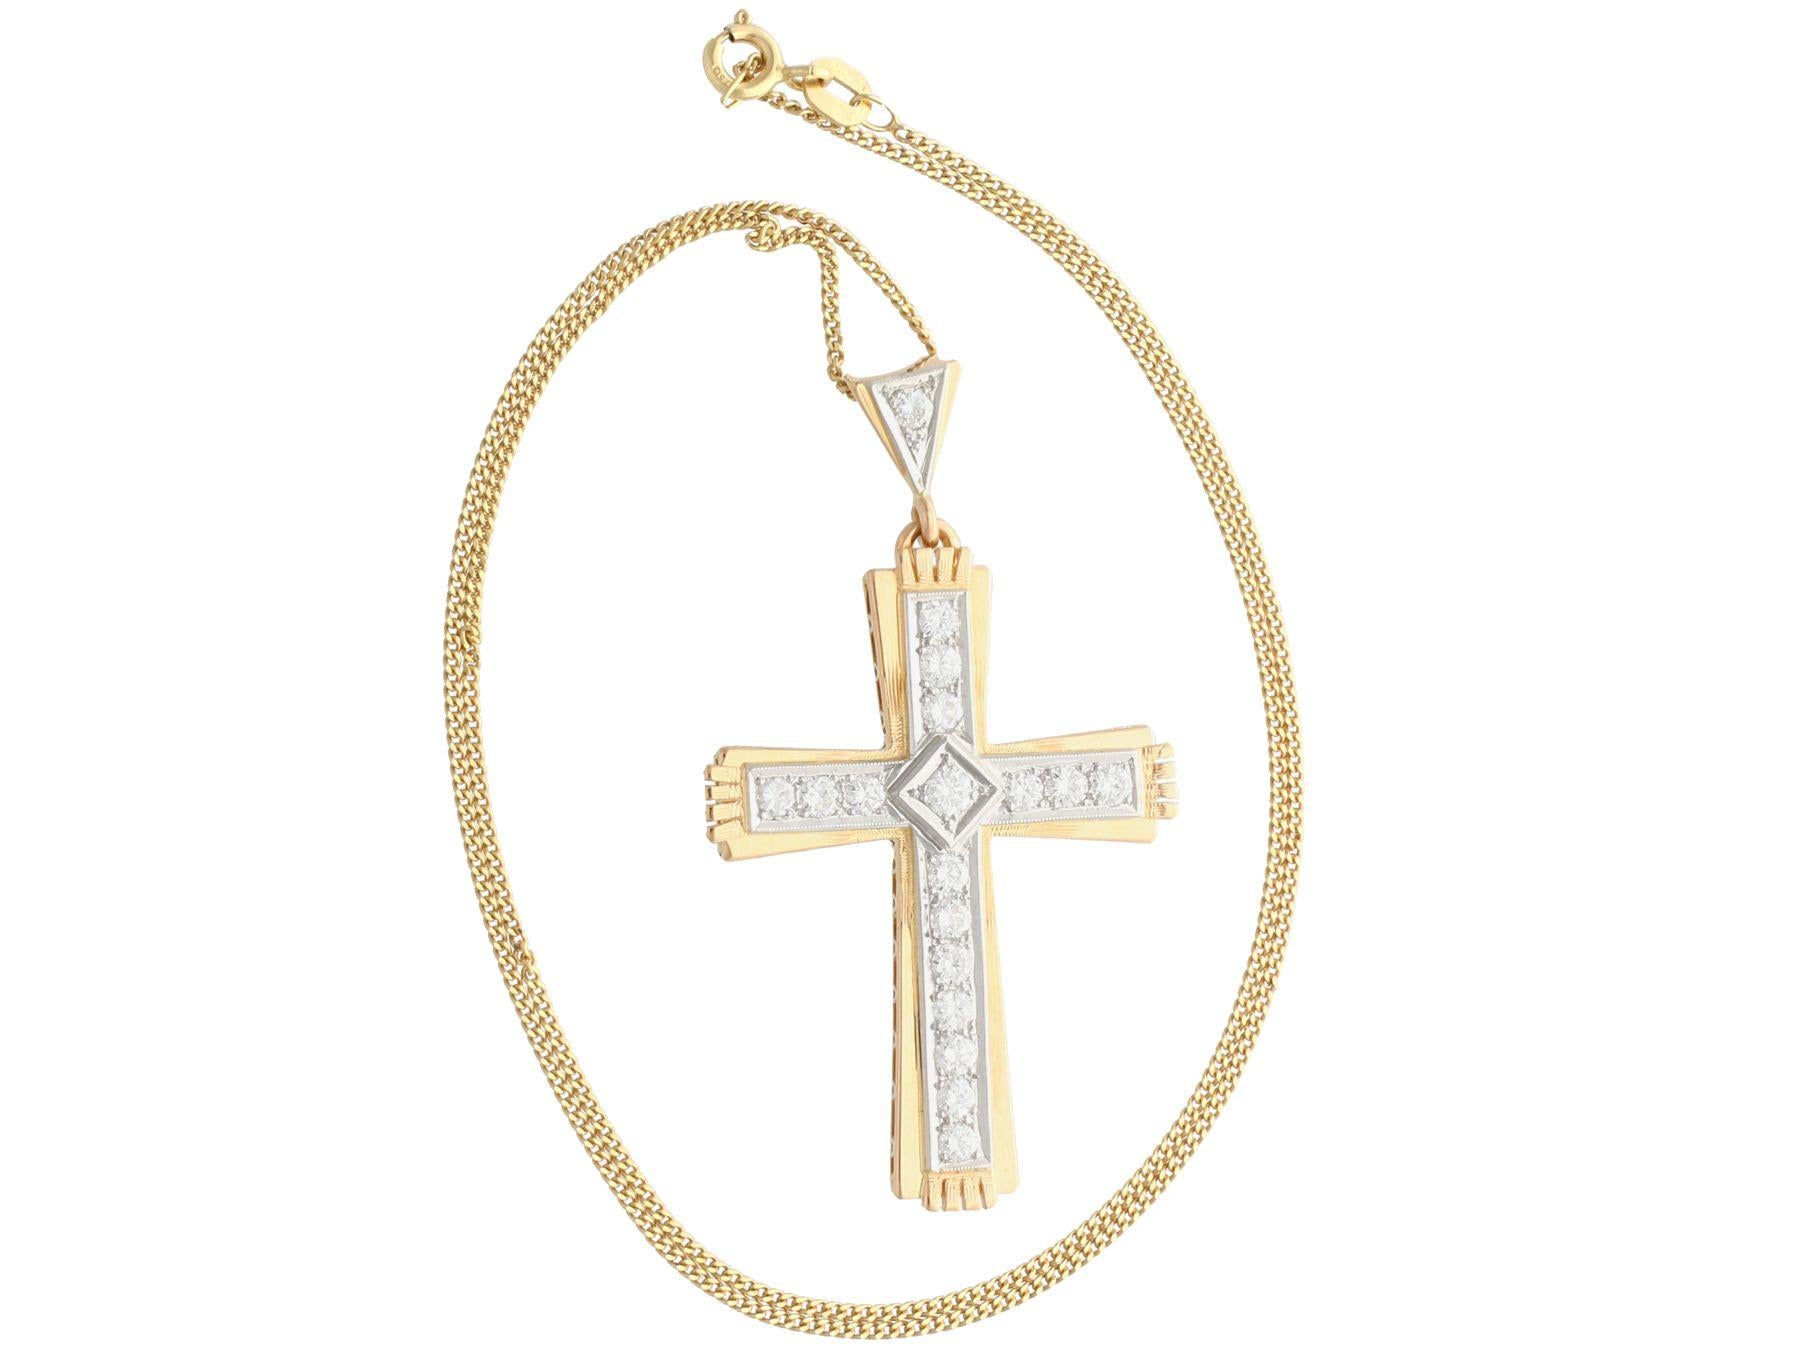 A stunning, fine and impressive Belgium vintage 1.68 carat diamond and 18 karat yellow gold, 18 karat white gold cross pendant; part of our diverse diamond estate jewelry collections.

This fine and impressive vintage diamond pendant has been